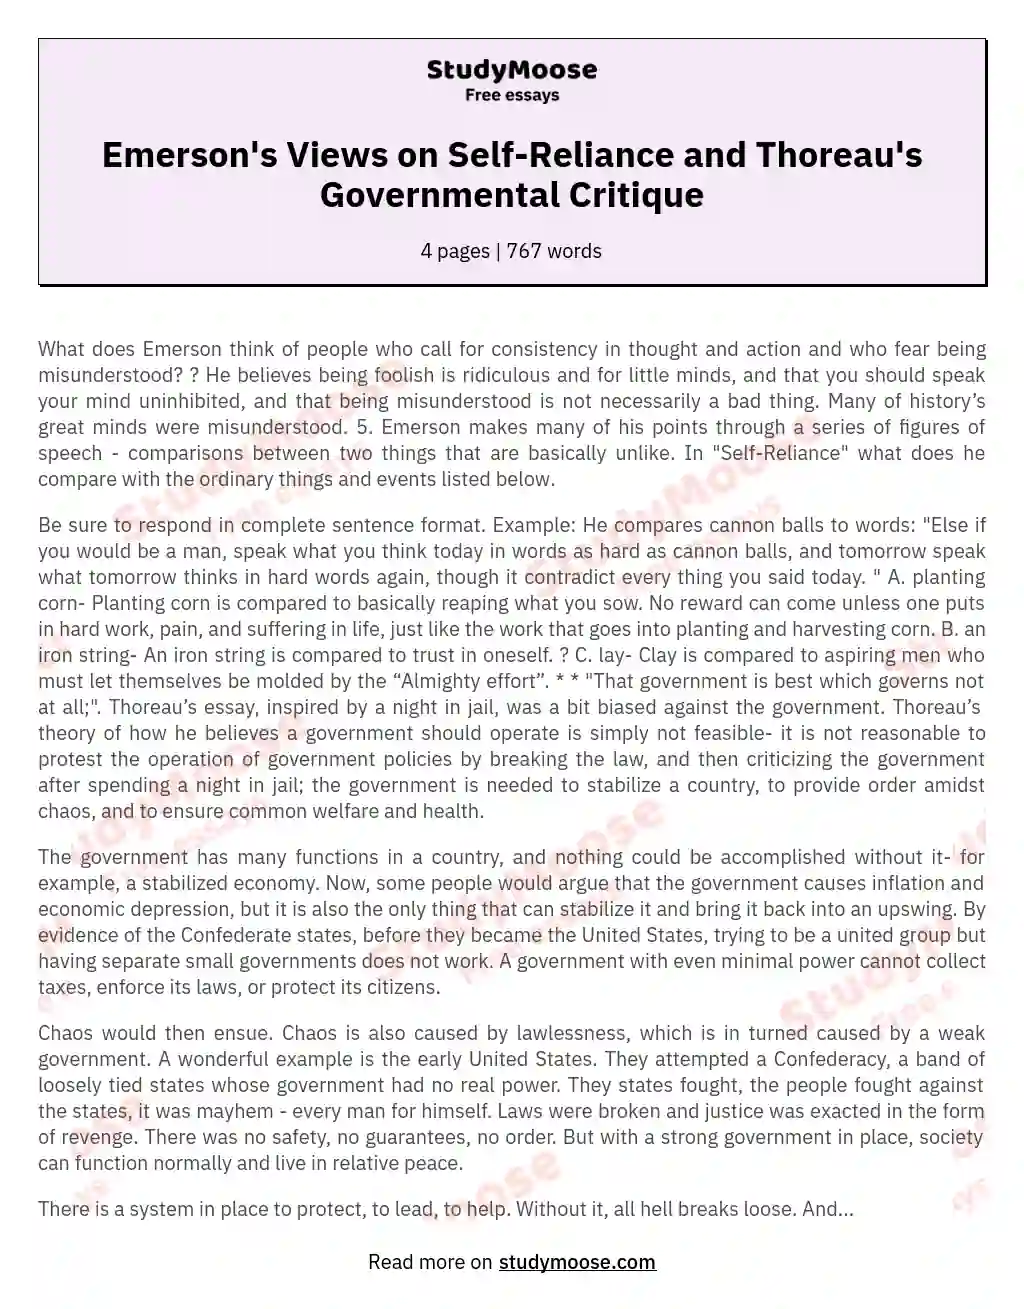 Emerson's Views on Self-Reliance and Thoreau's Governmental Critique essay